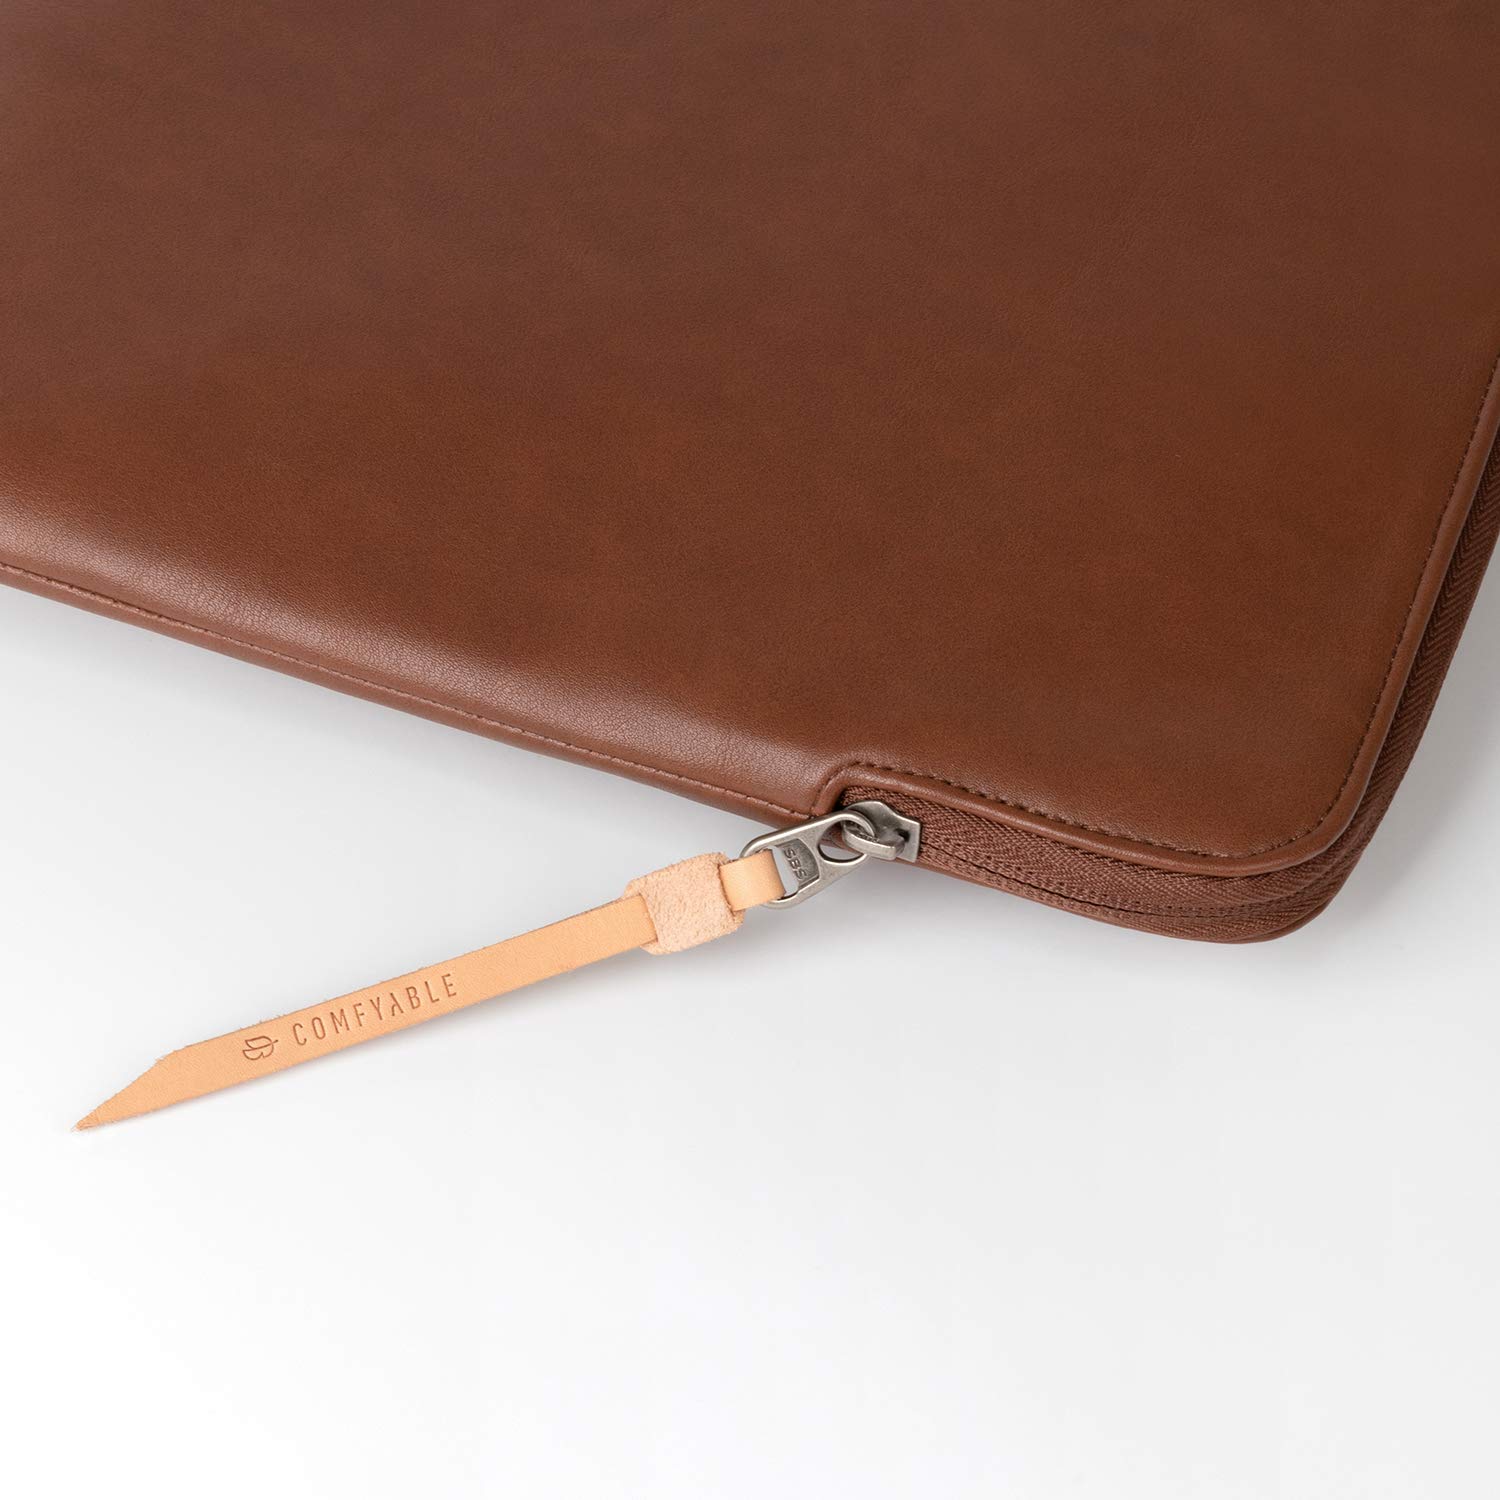 Genuine Leather Case For Macbook Air 13 Macbook Pro 13 leather sleeve –  AarteDesign